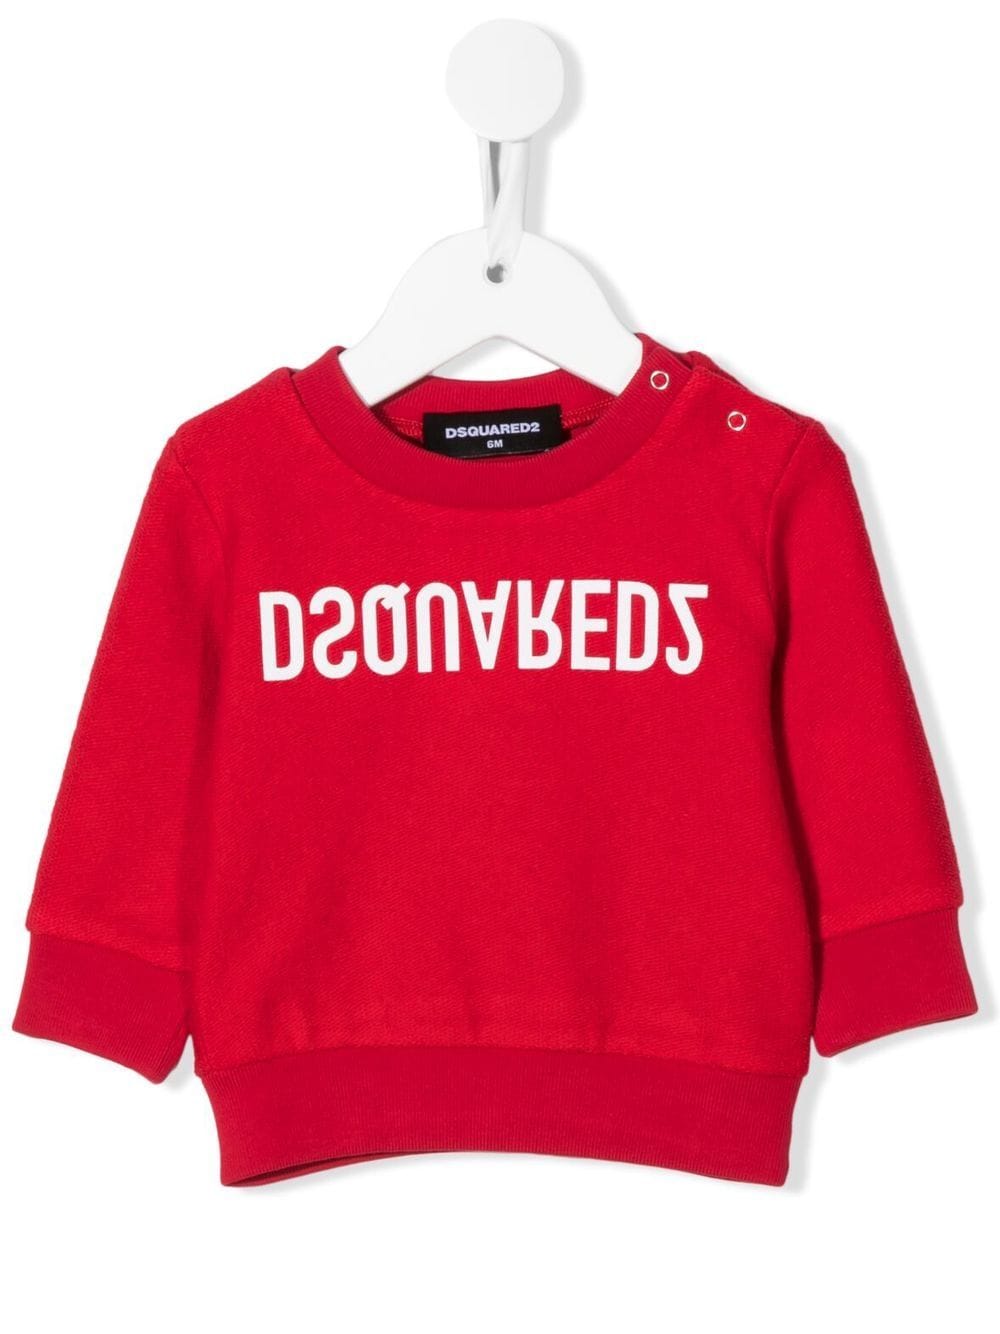 Dsquared2 Baby Red Sweatshirt With White Reflected Logo